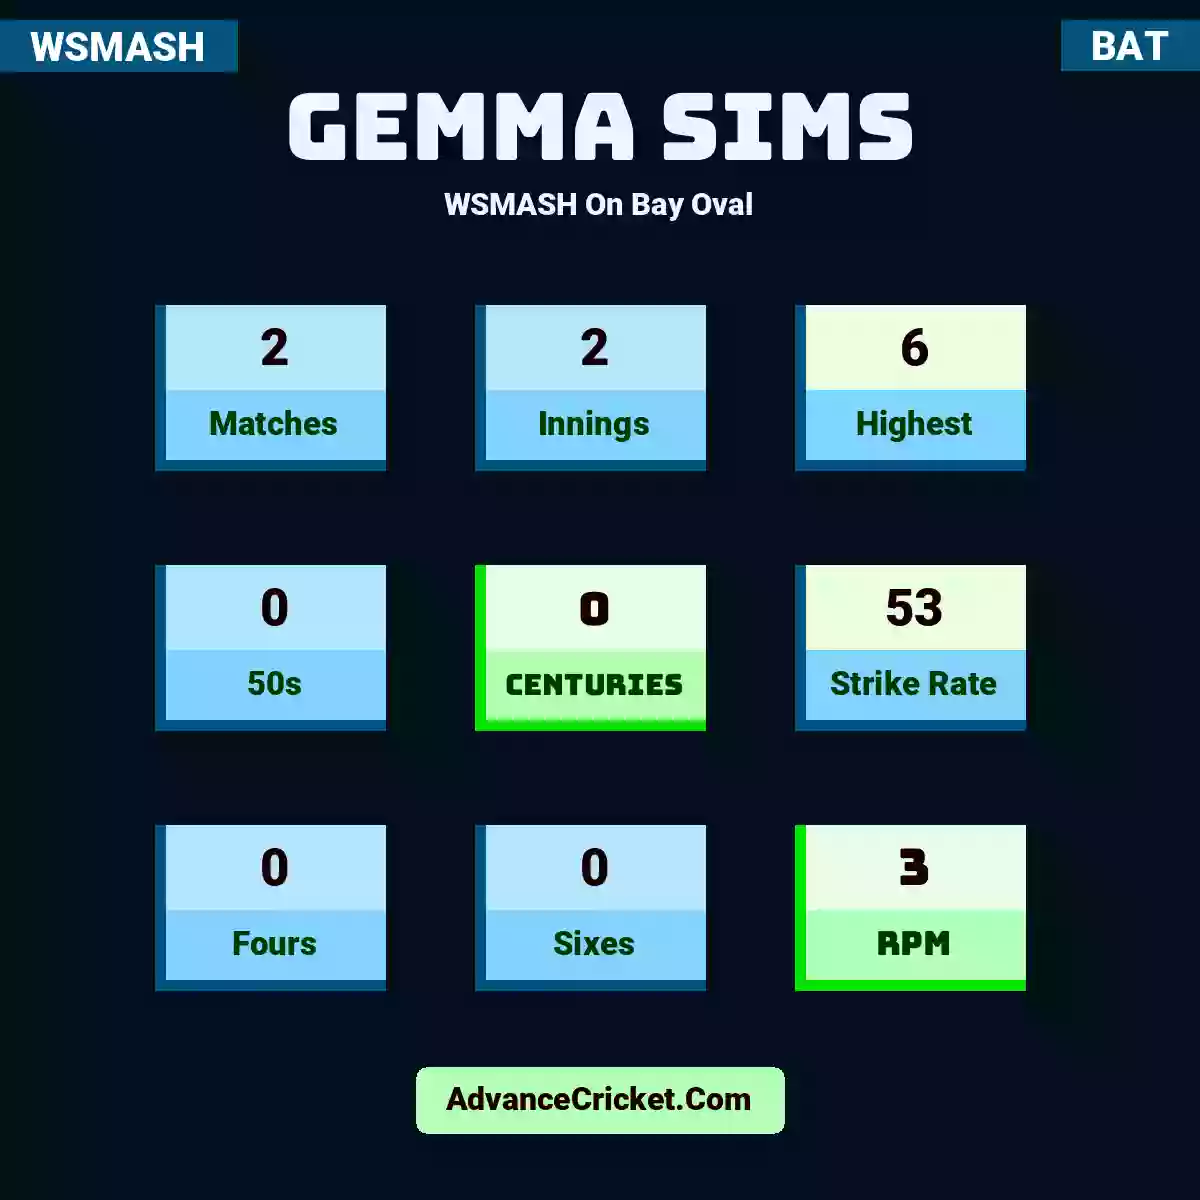 Gemma Sims WSMASH  On Bay Oval, Gemma Sims played 2 matches, scored 6 runs as highest, 0 half-centuries, and 0 centuries, with a strike rate of 53. G.Sims hit 0 fours and 0 sixes, with an RPM of 3.